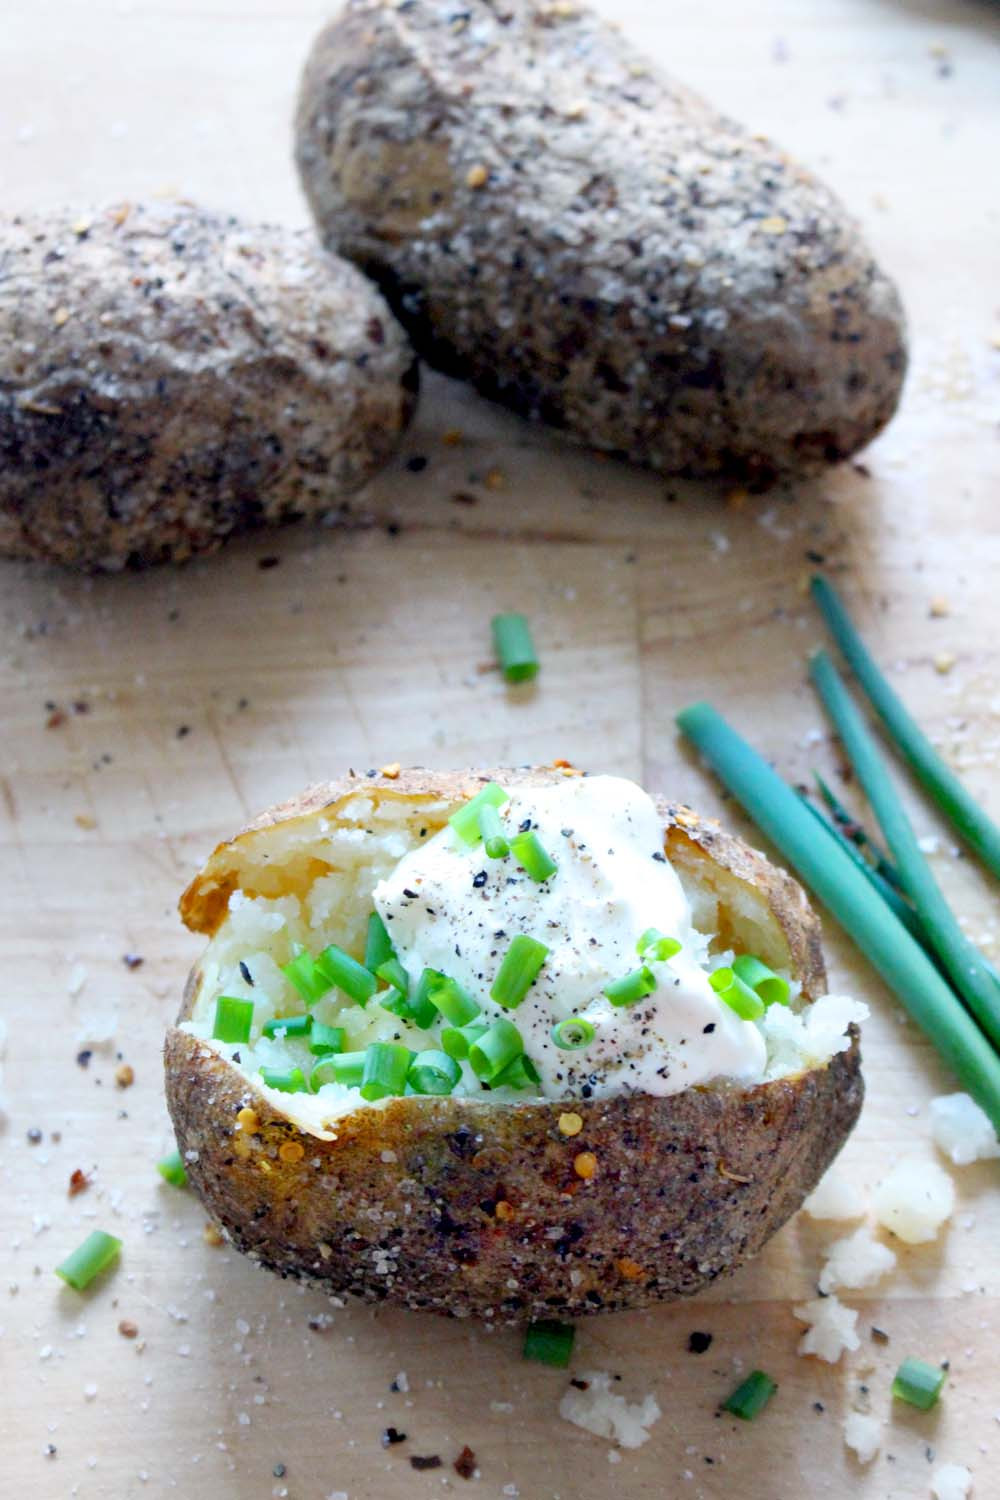 How To Make The Perfect Baked Potato
 How to make Perfect Baked Potatoes with yummy crispy skin